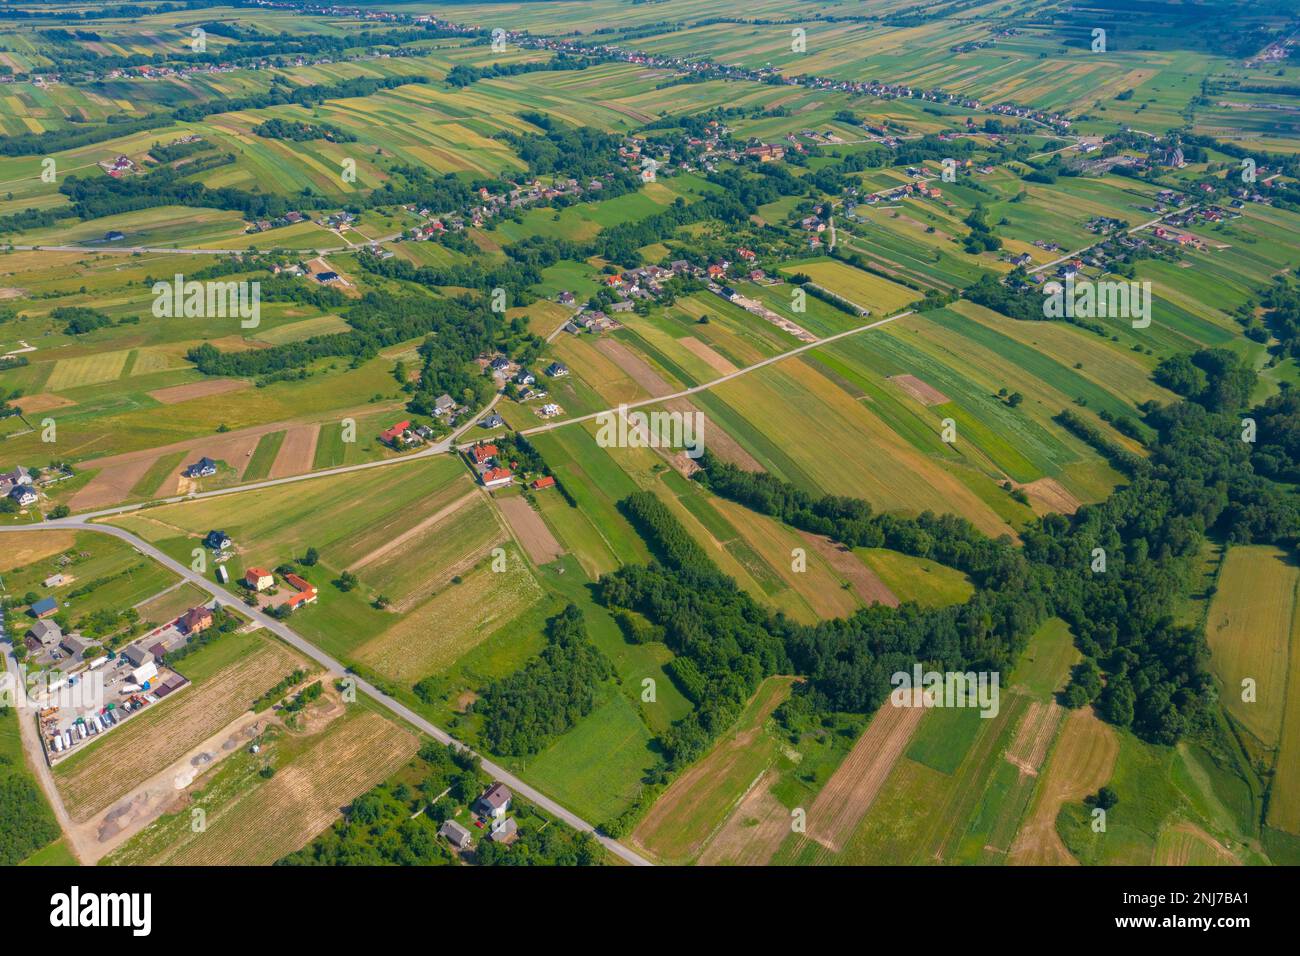 Beautiful countryside scene. Aerial view of rural road, agribusiness, livestock, pasture. Great landscape. Rural scene. Agriculcure scene. Farm scene. Stock Photo